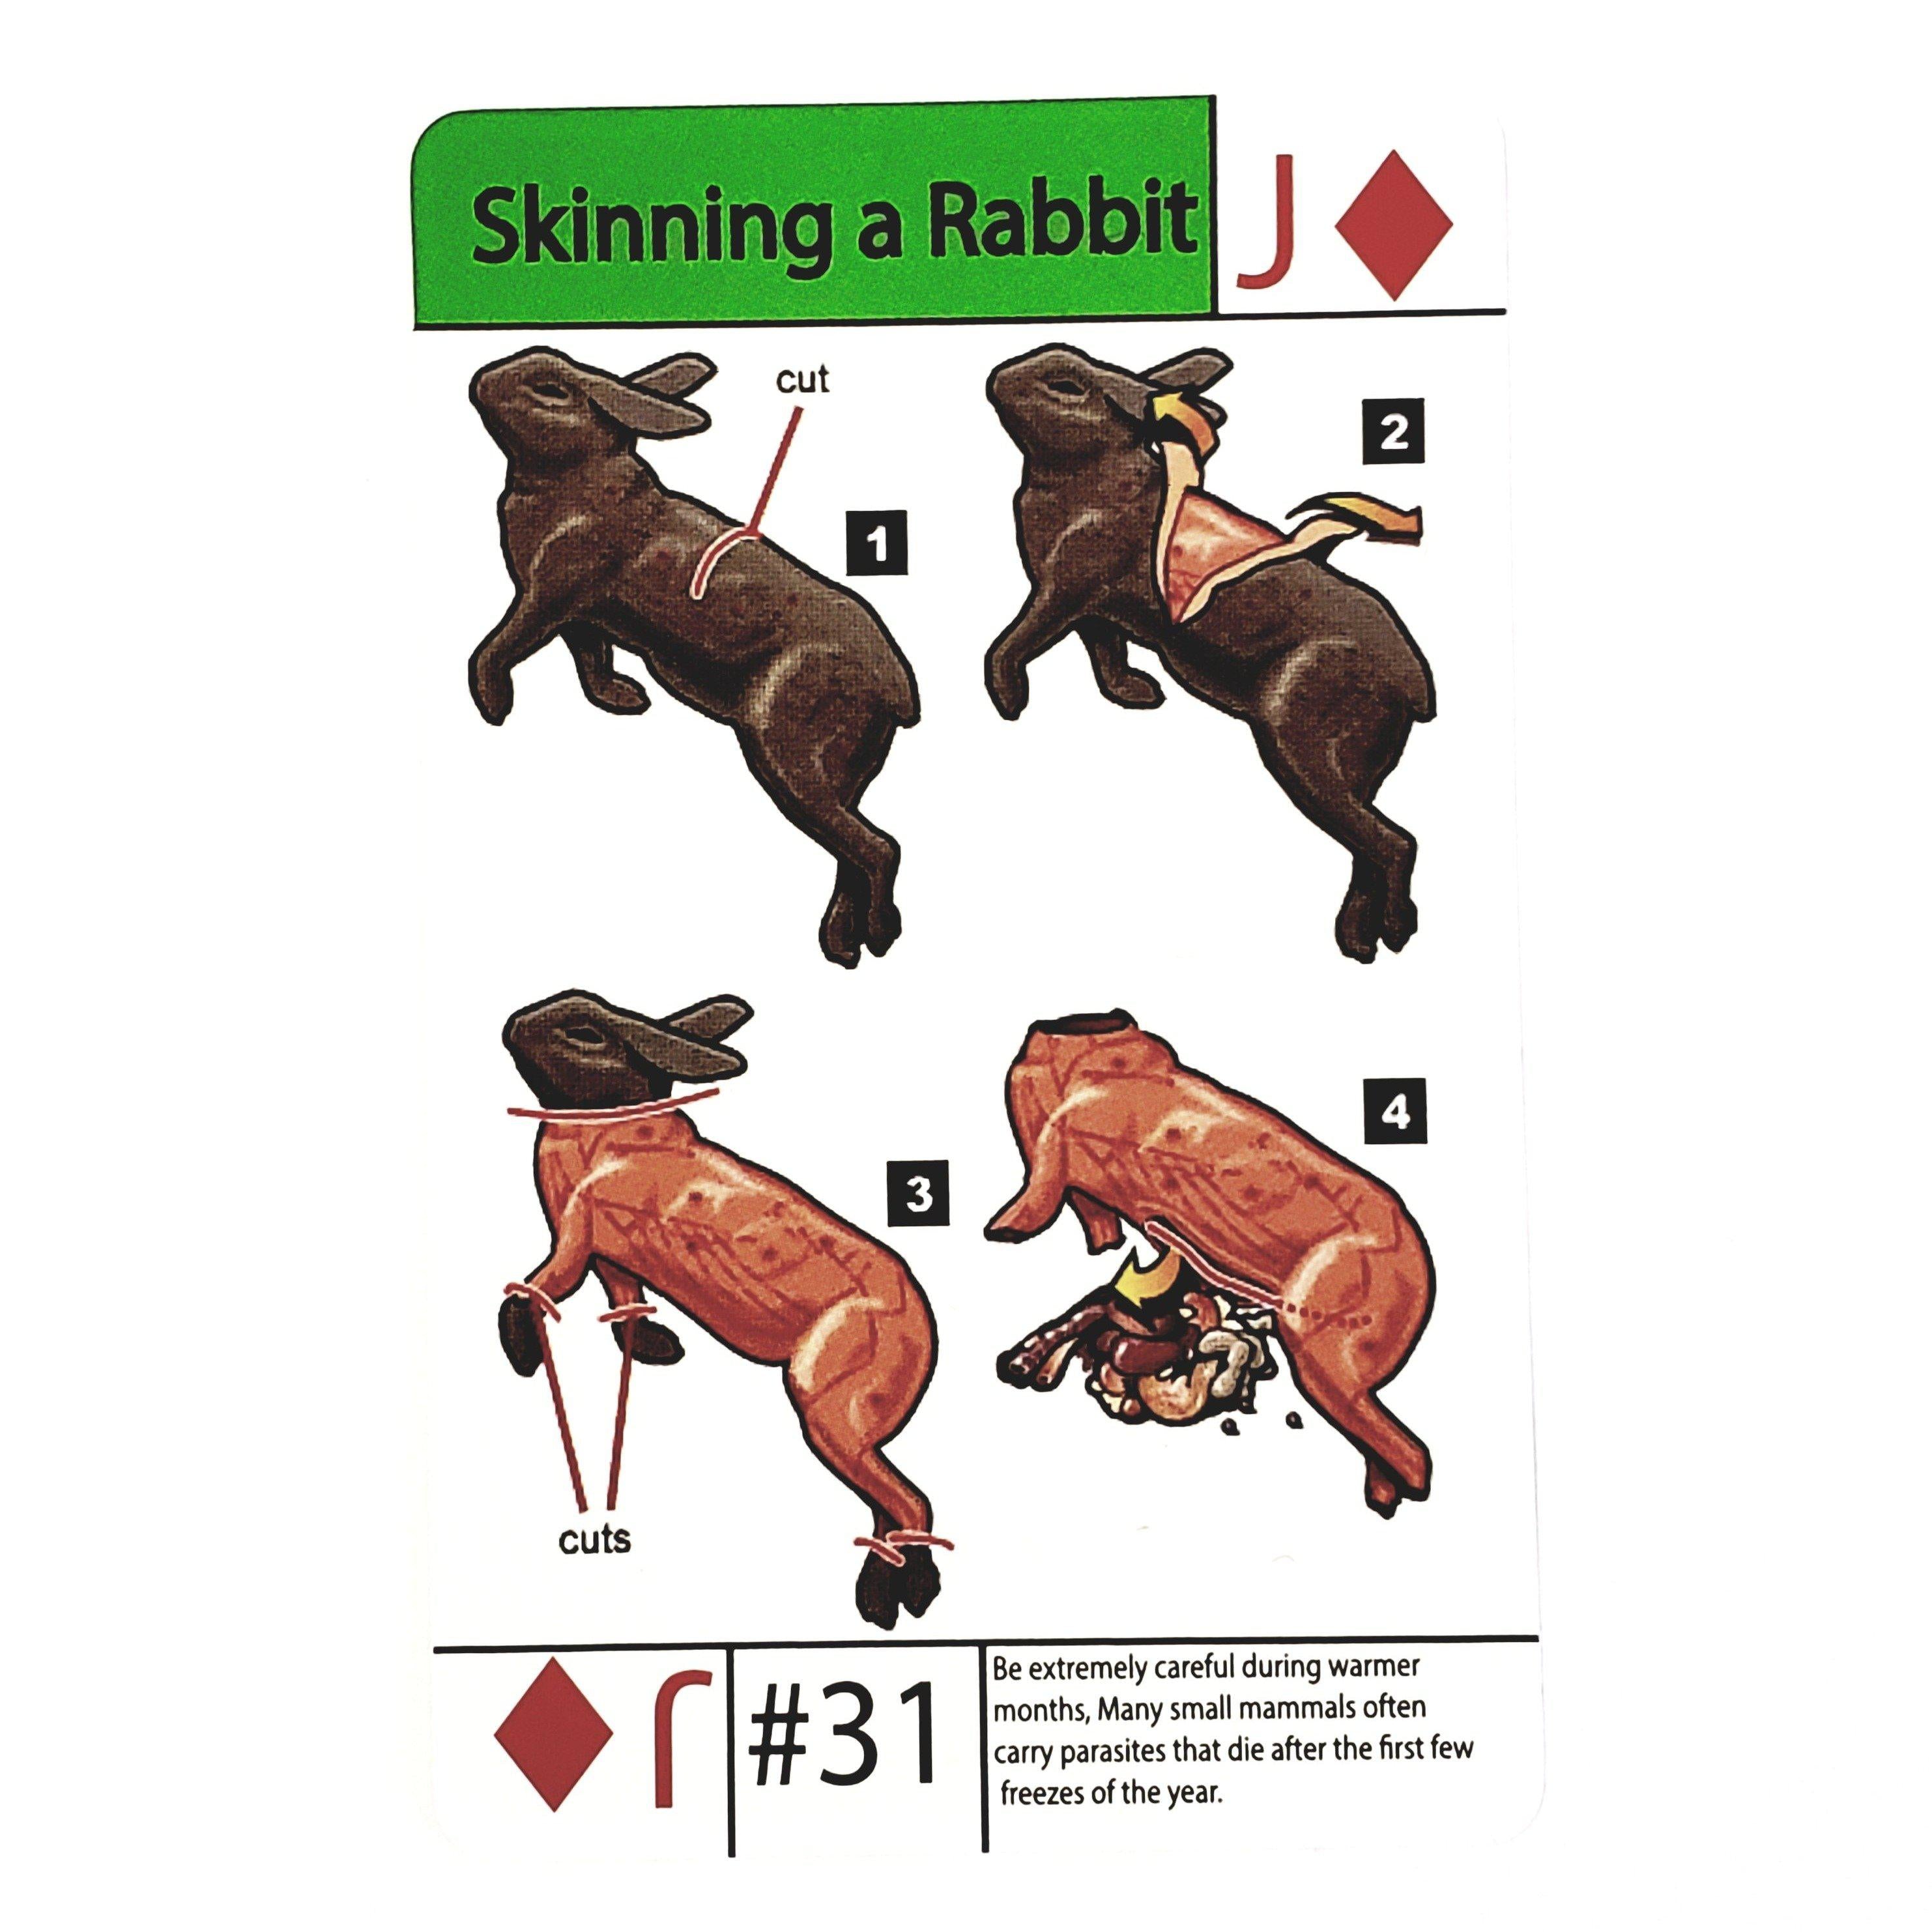 How to Skin a Rabbit instructional tip card